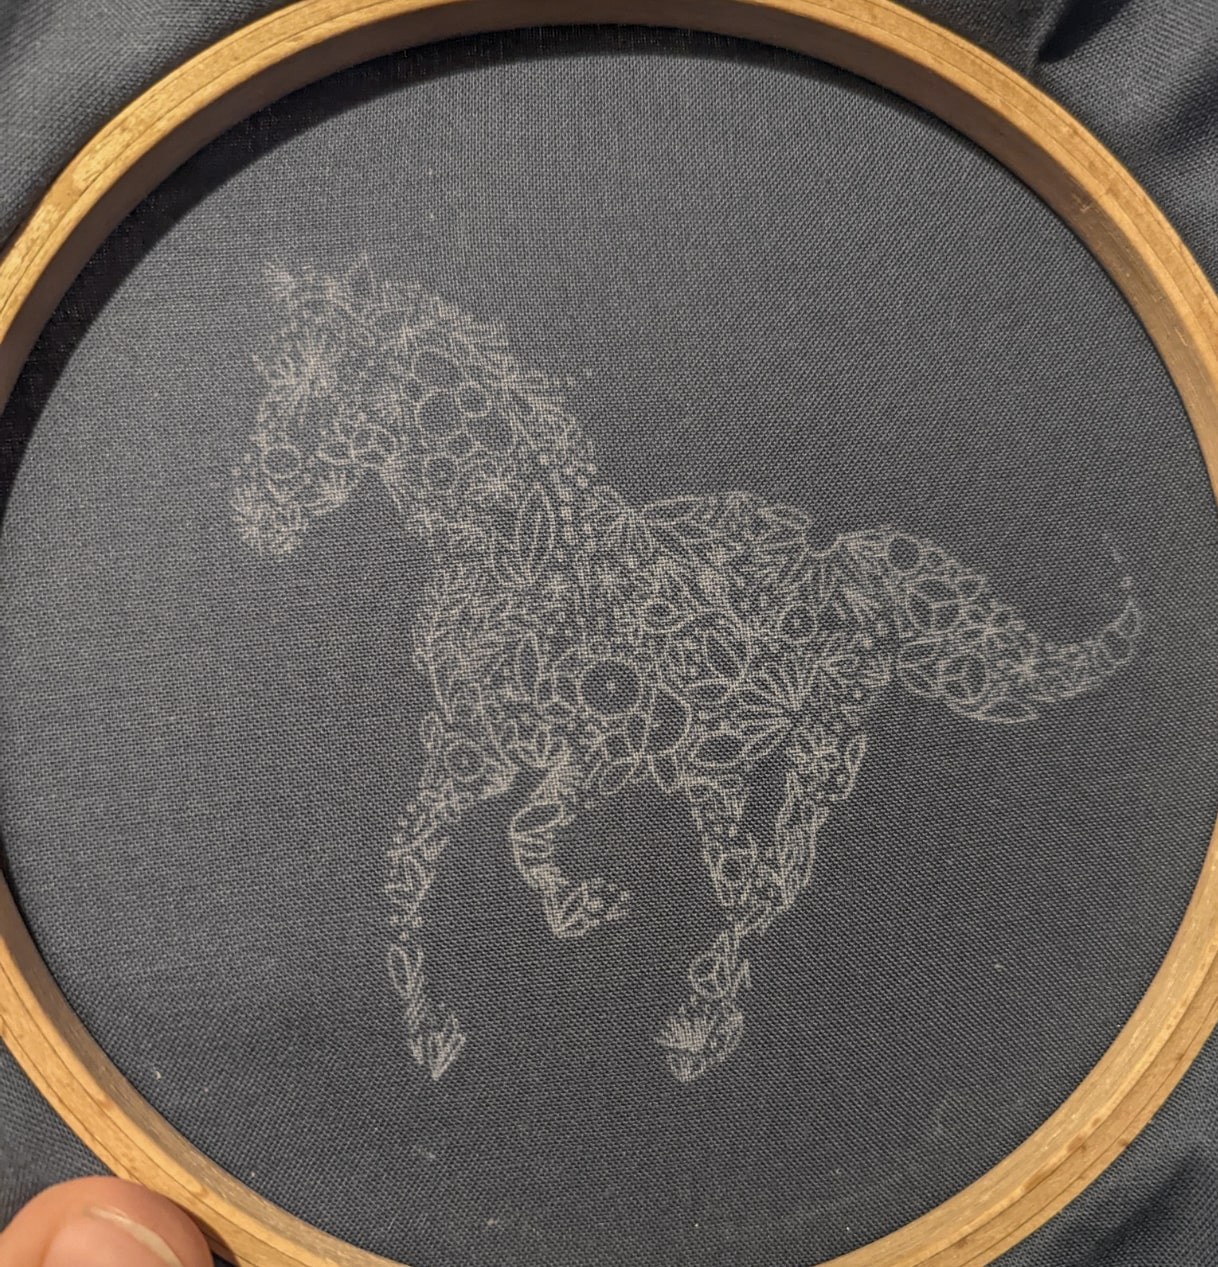 This is an example of a horse drawn onto the fabric using carbon paper.